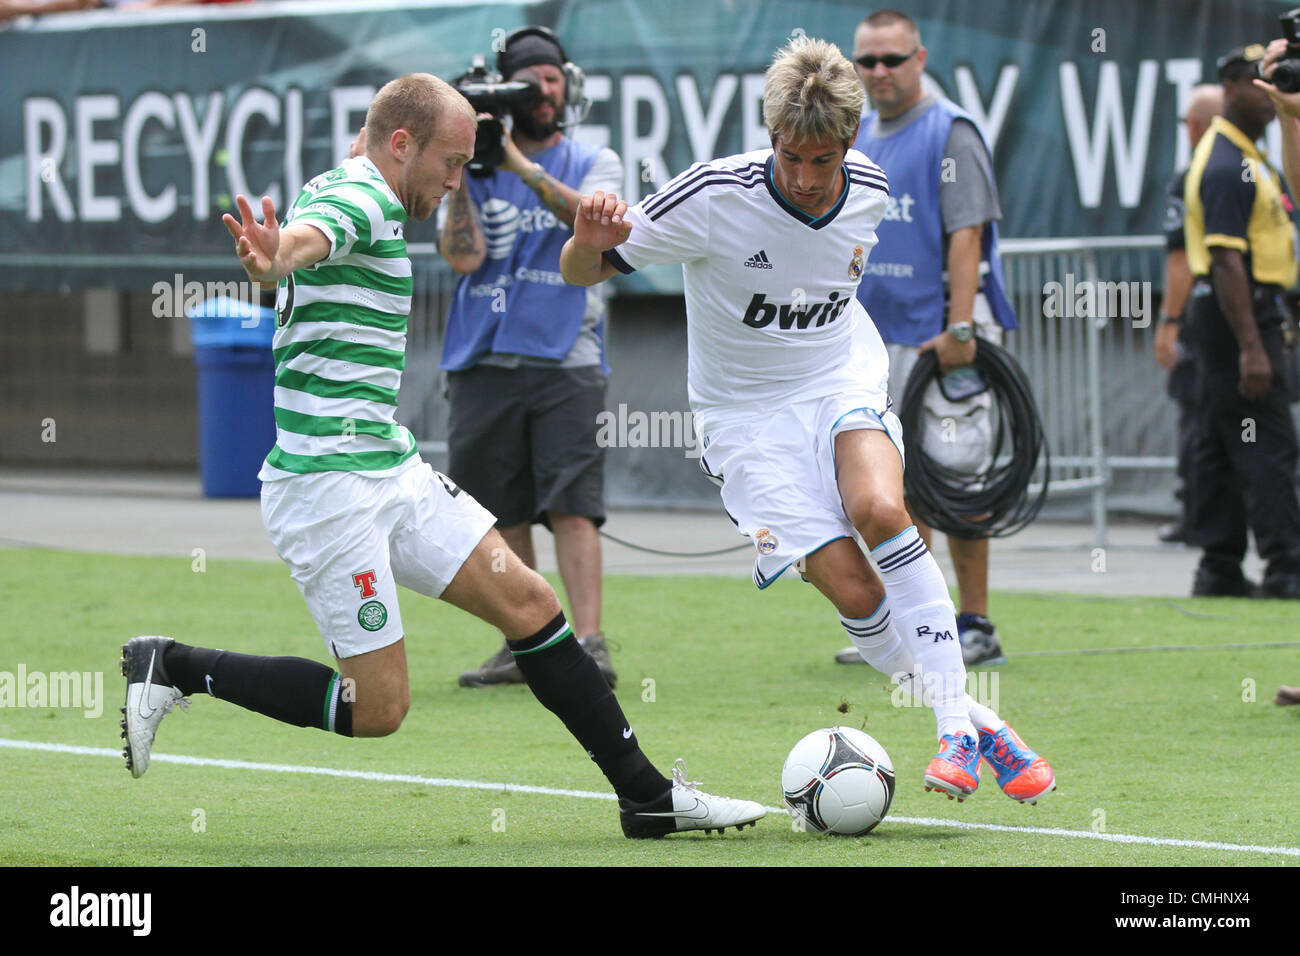 11.08.2012. Philadelphia, USA.  Real Madrid midfielder Fabio Coentrao (15) and Celtic FC forward Dylan McGeouch (46) during the World Football Challenge match between Real Madrid and Celtic FC at Lincoln Financial Field in Philadelphia, PA. Real Madrid defeated Celtic 2-0. Stock Photo